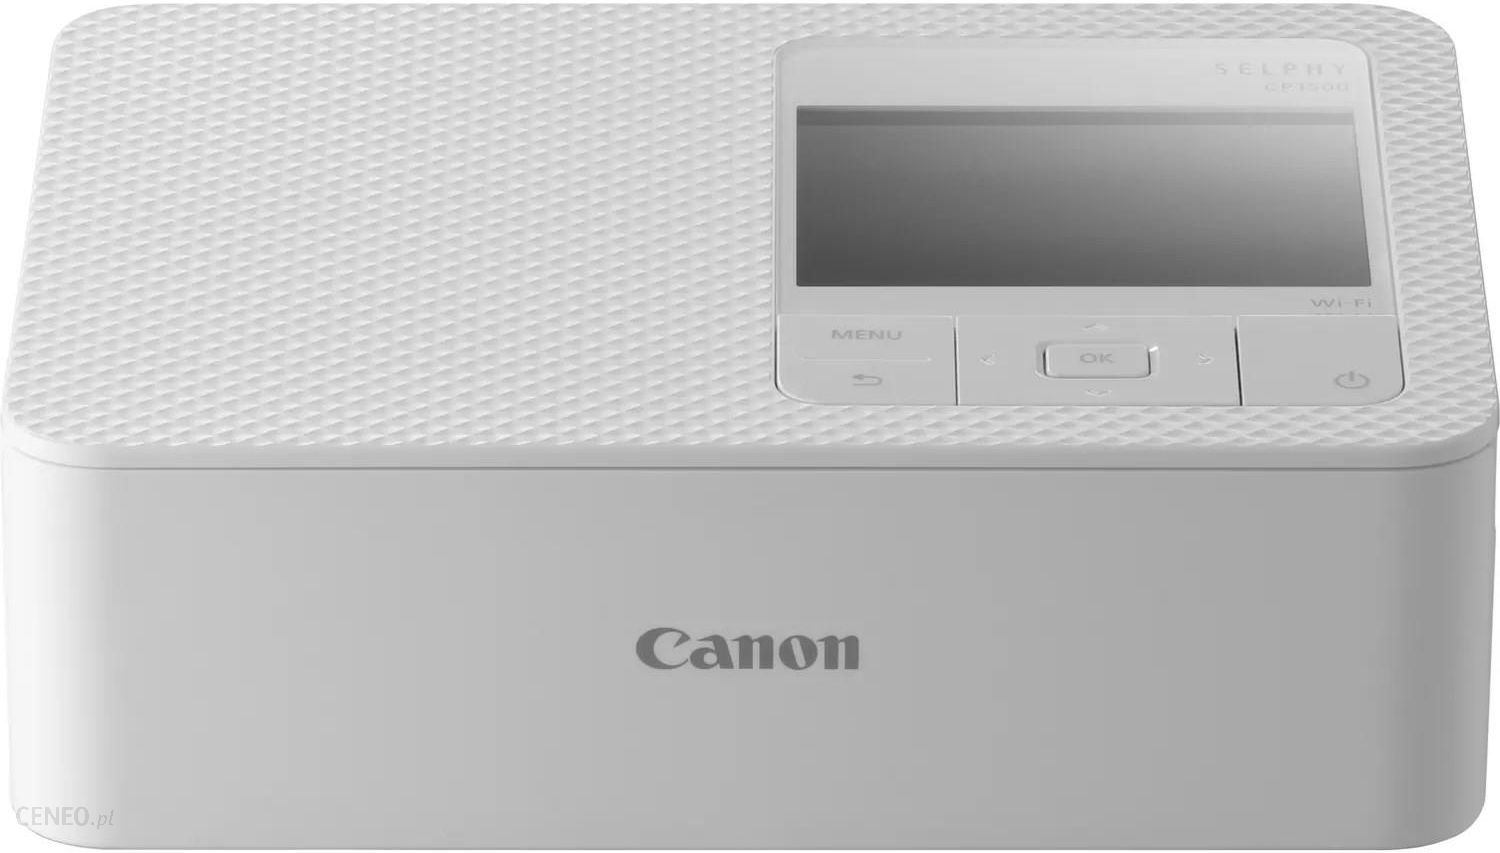 Canon SELPHY CP1300 vs CP1500: Which Photo Printer is Better